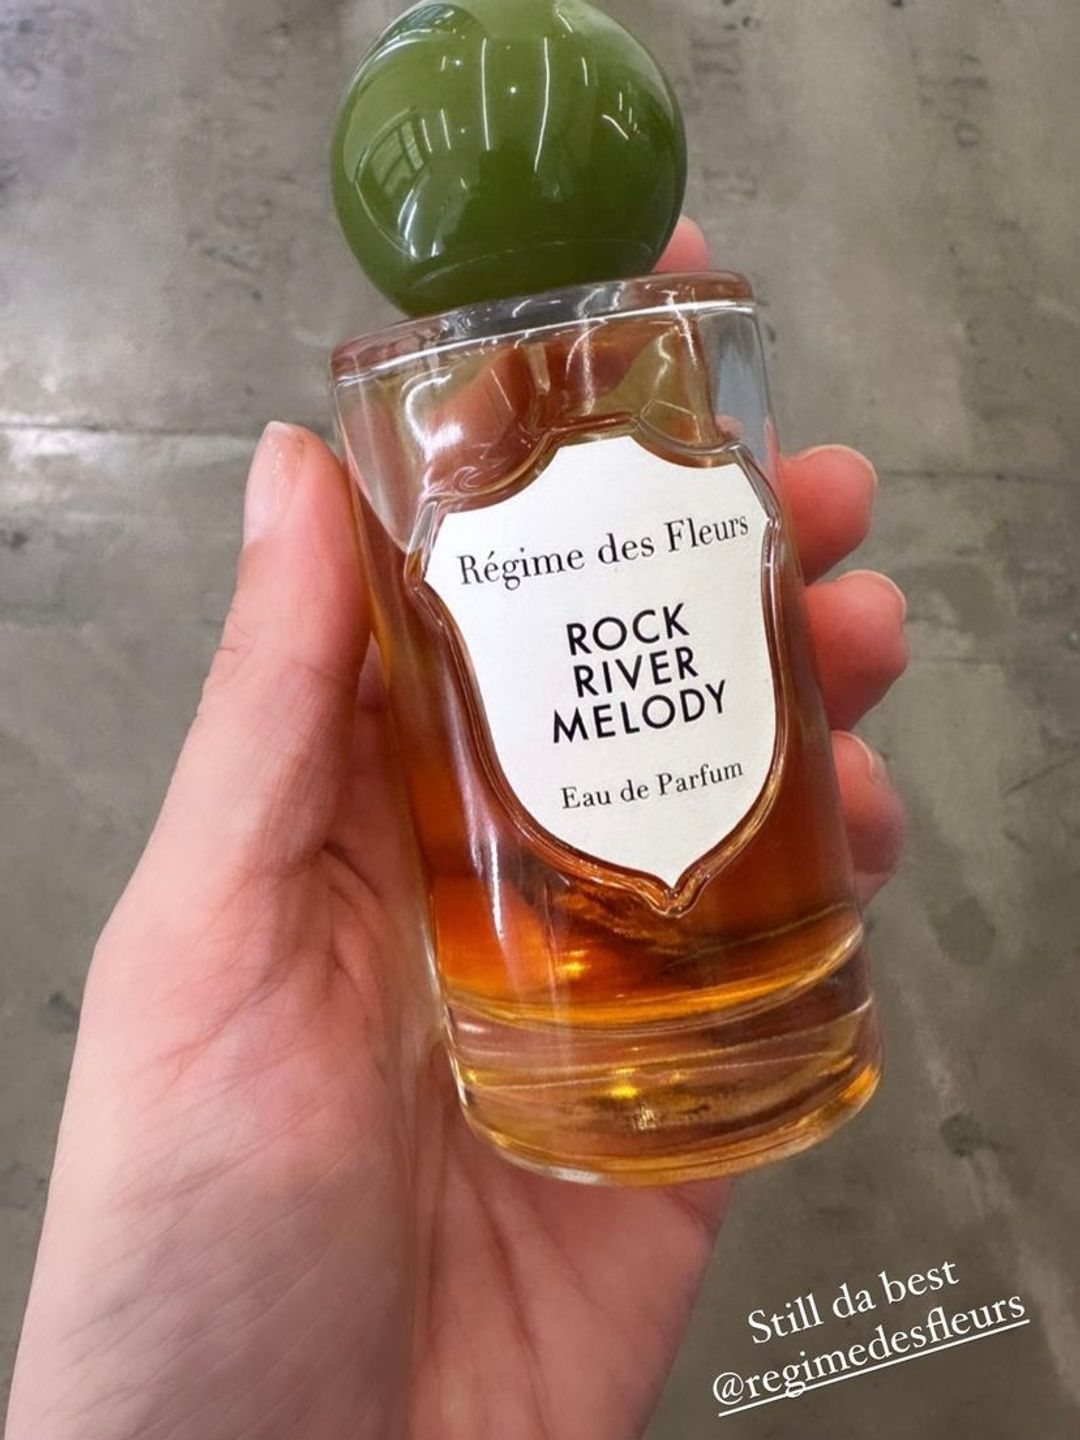 Bottle of Rock River Melody perfume in Alexa Chung's hand 